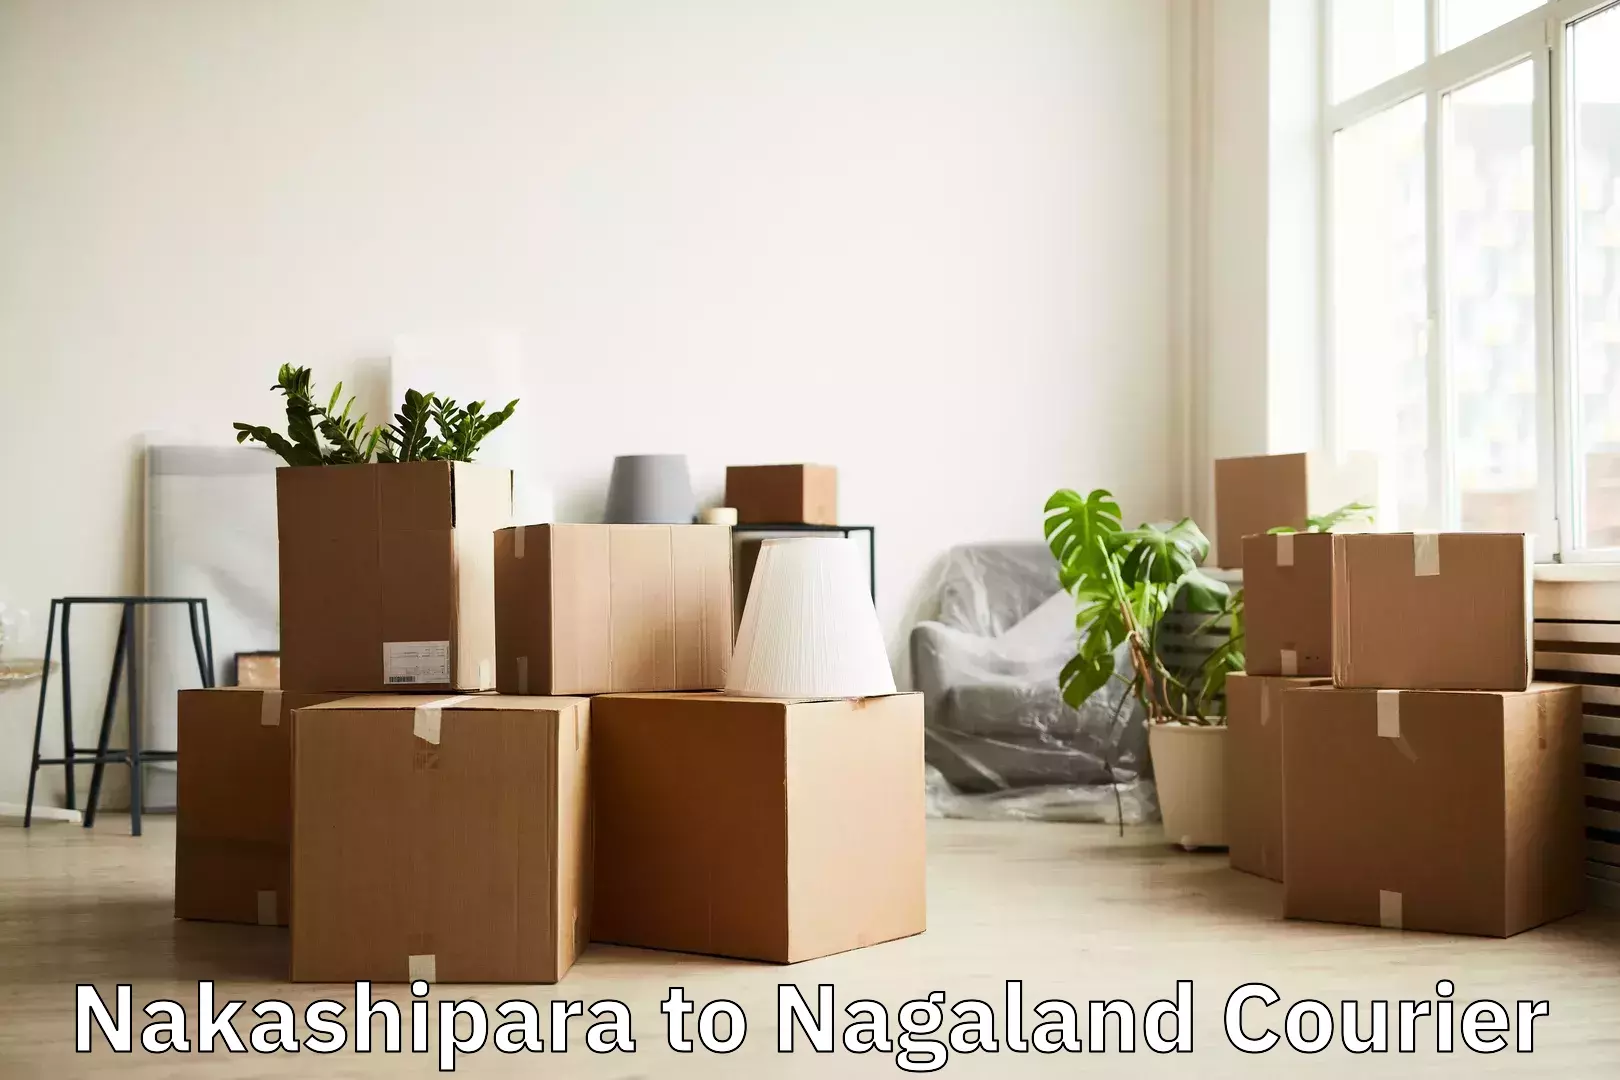 Luggage delivery solutions Nakashipara to Mon